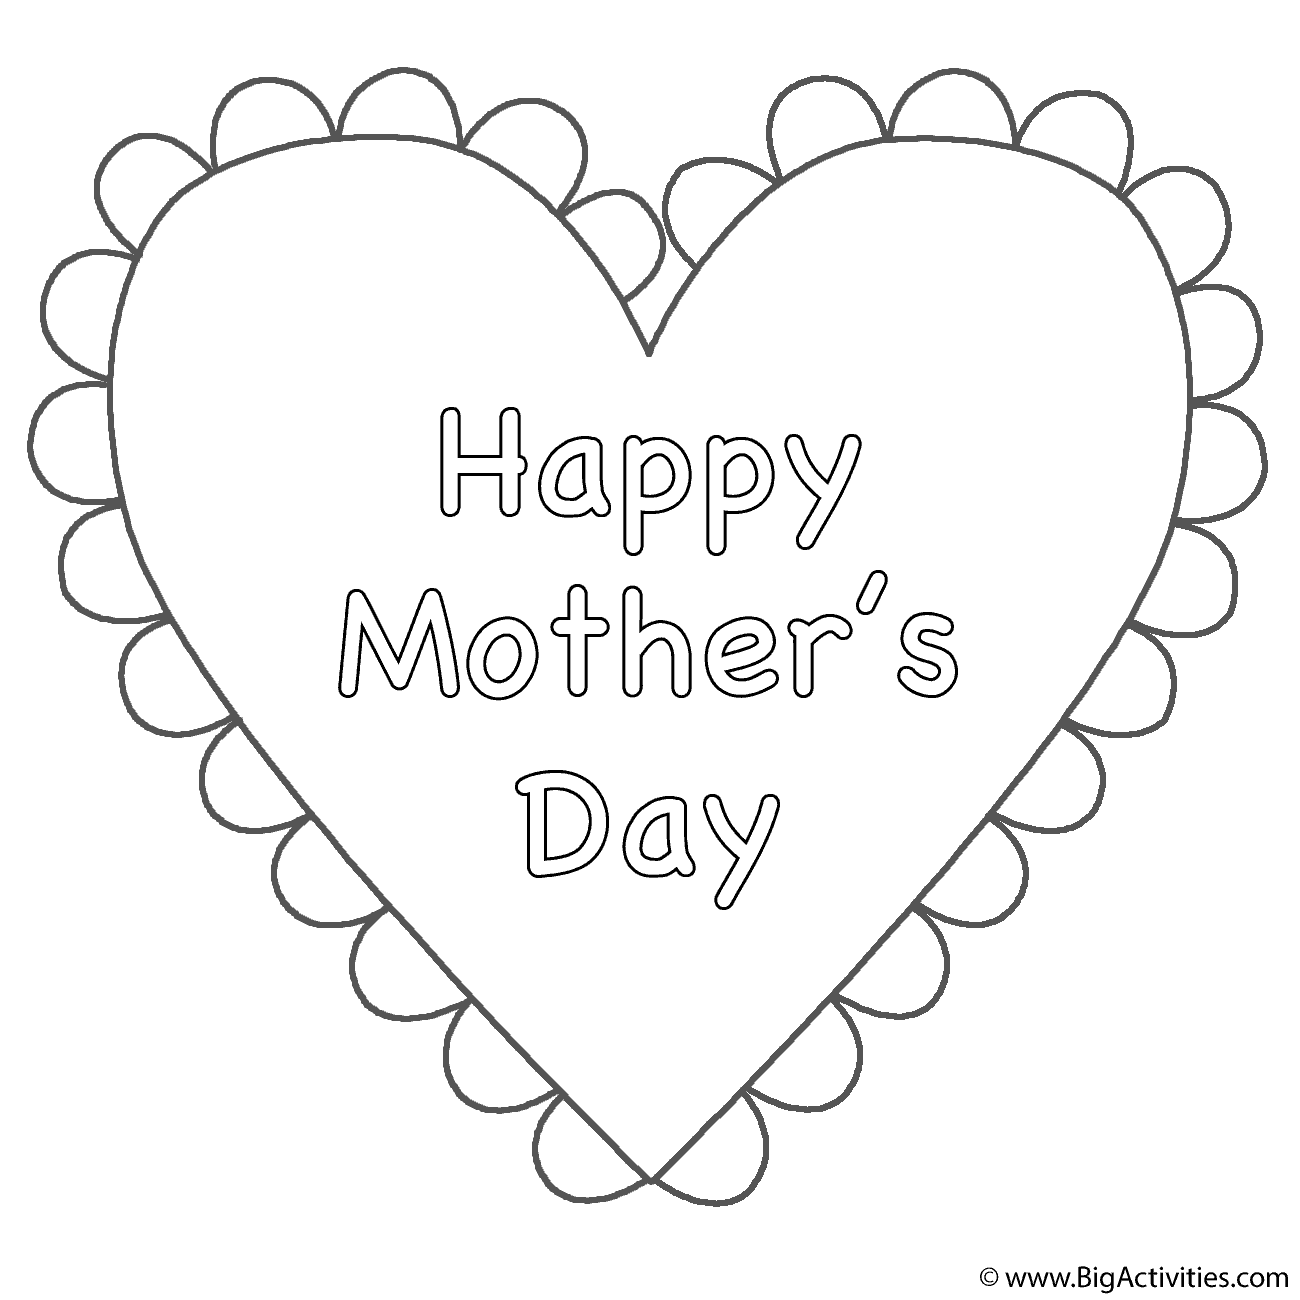  Heart  with Fringe and theme Coloring  Page  Mother s  Day  